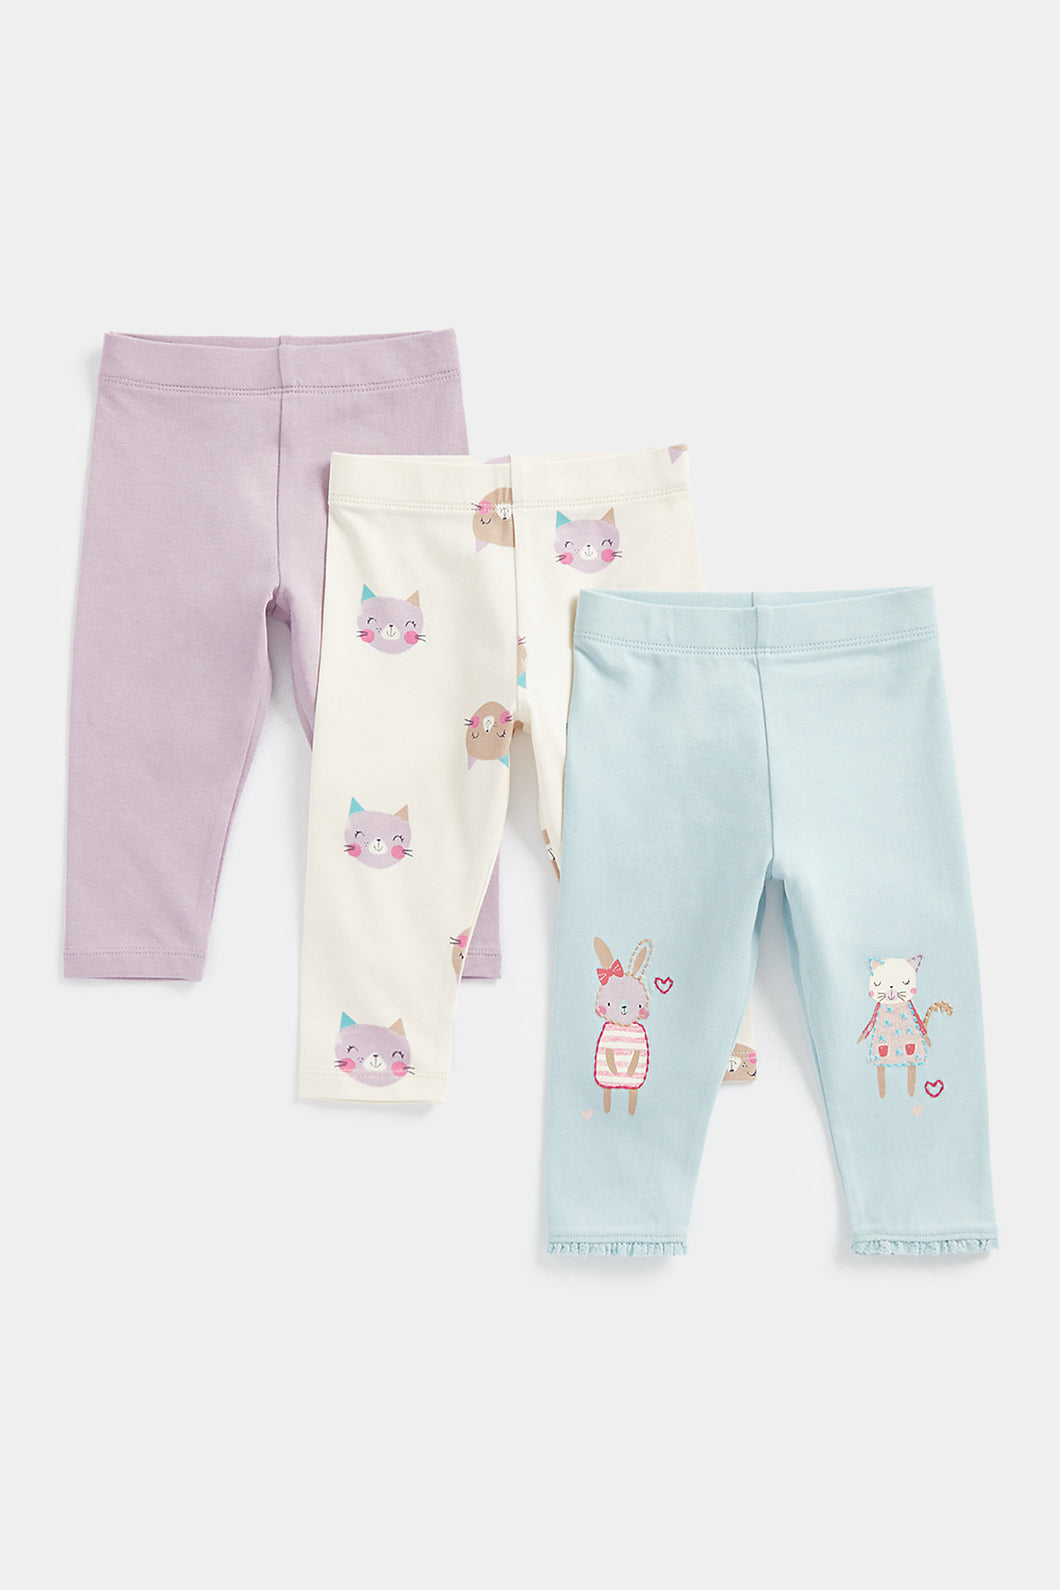 Mothercare Cat and Bunny Leggings - 3 Pack